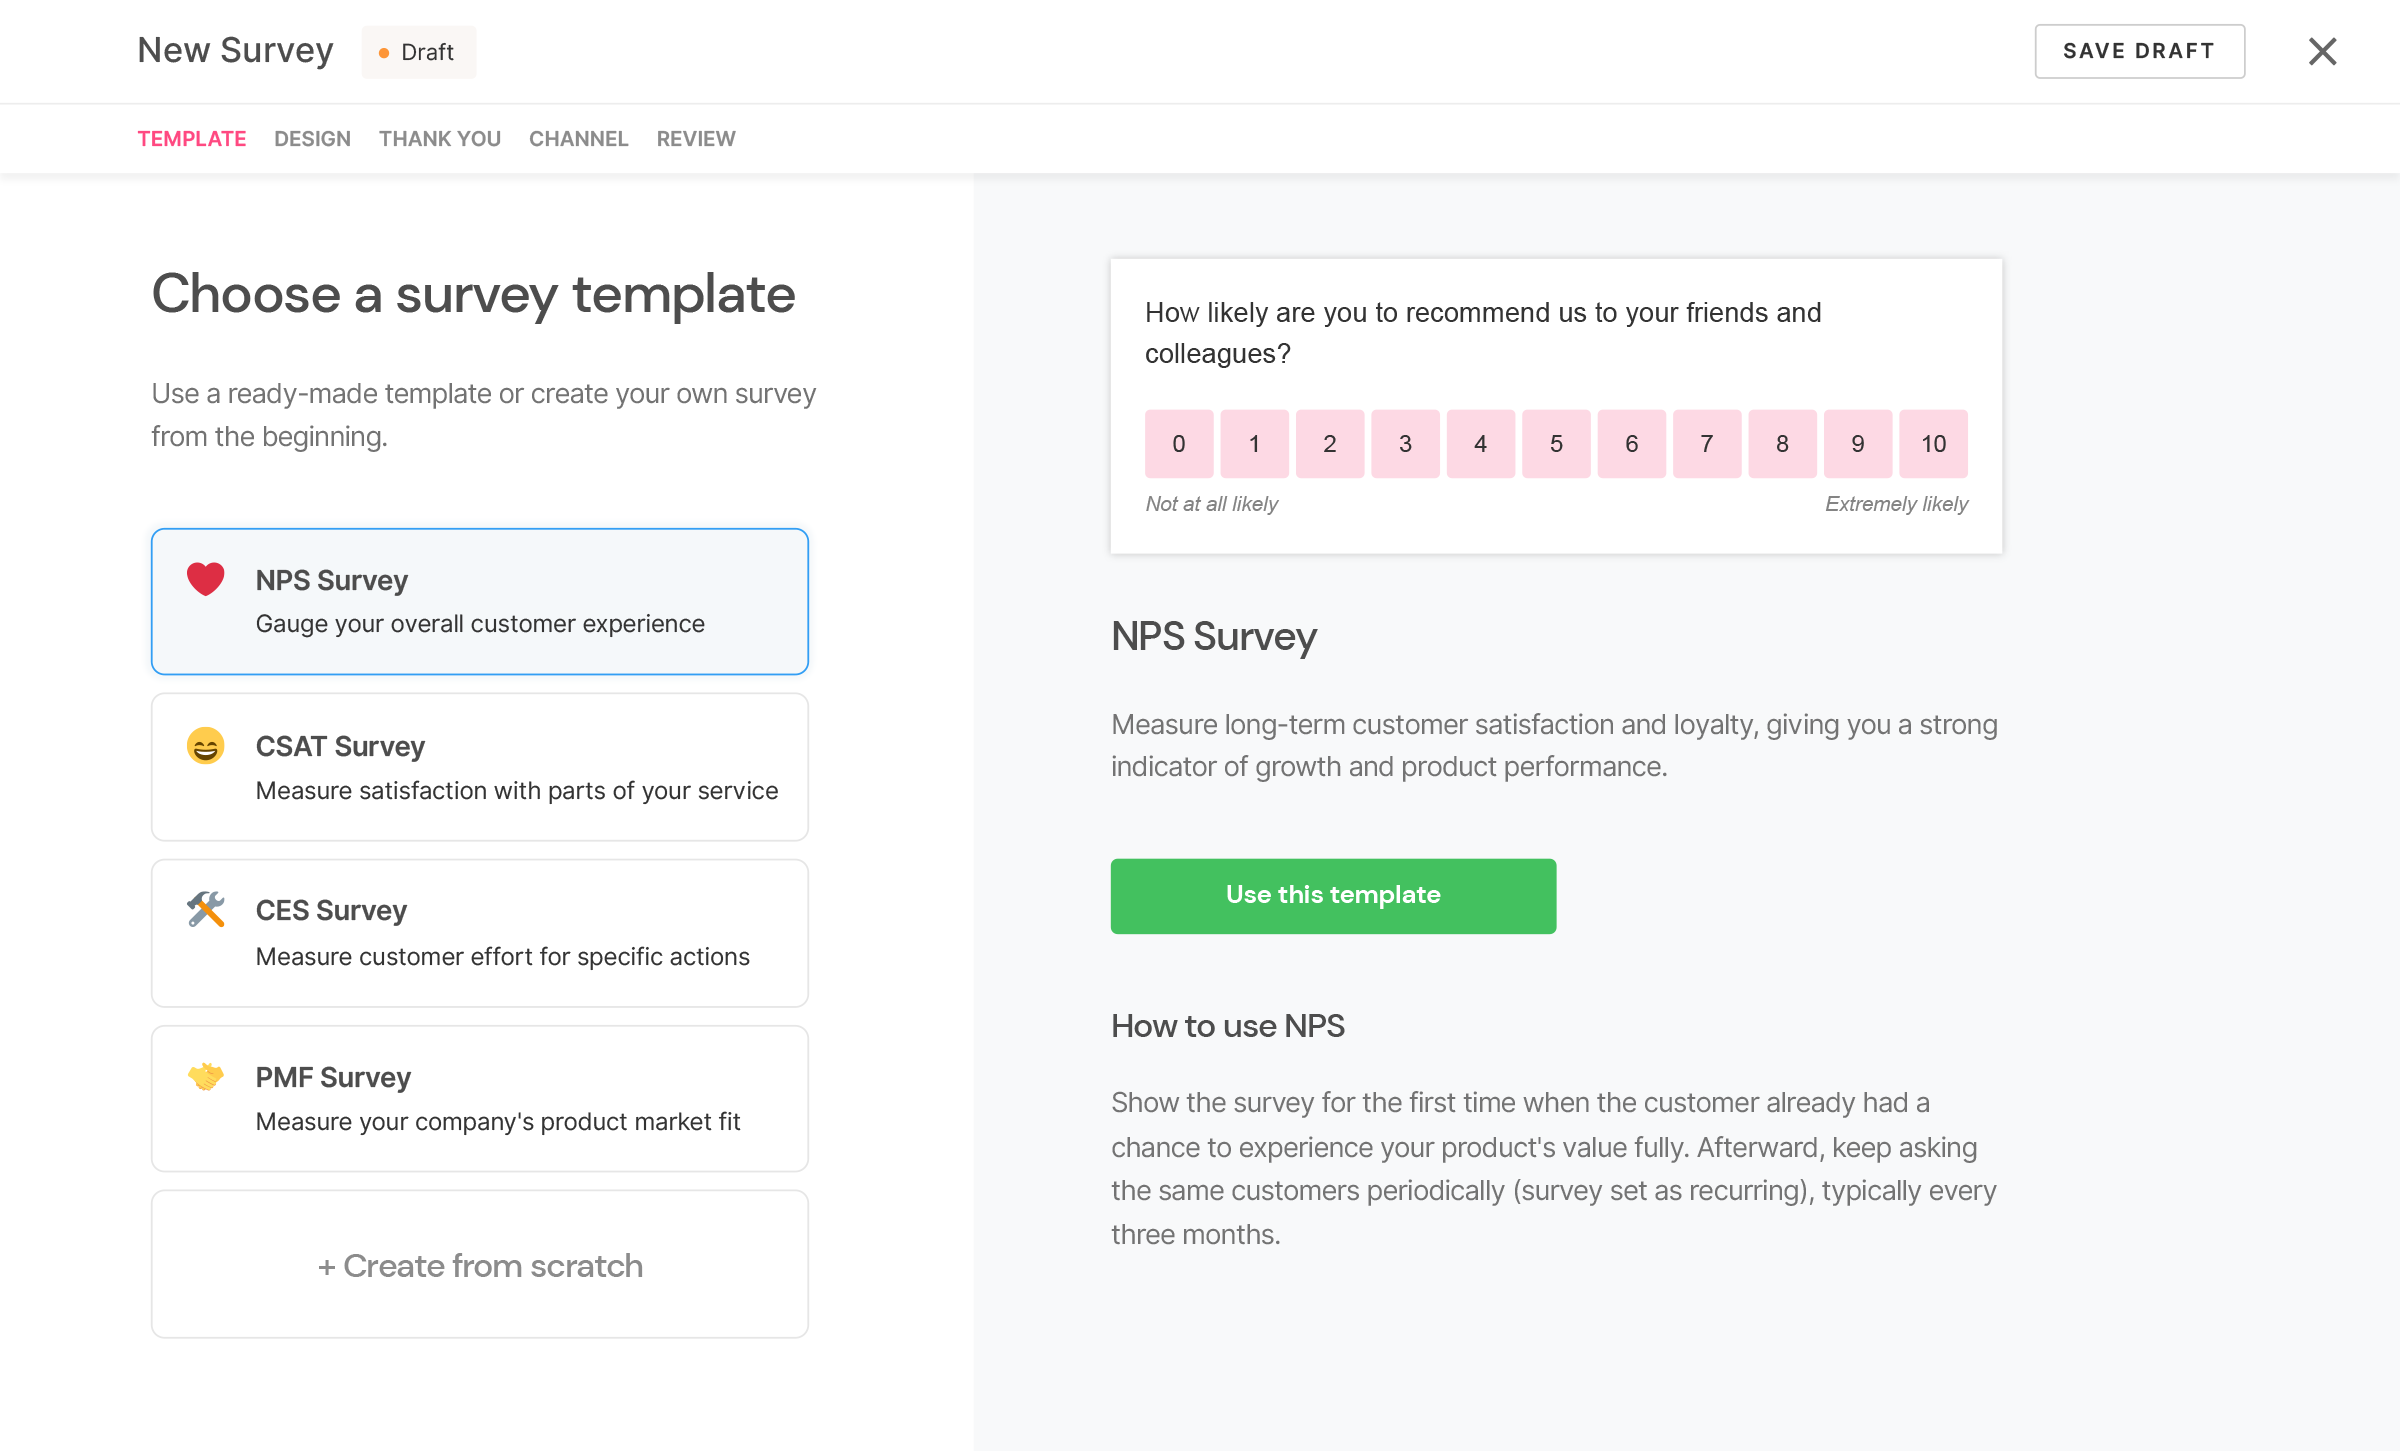 Use our customizable templates to quickly build all the surveys you need in a pinch.